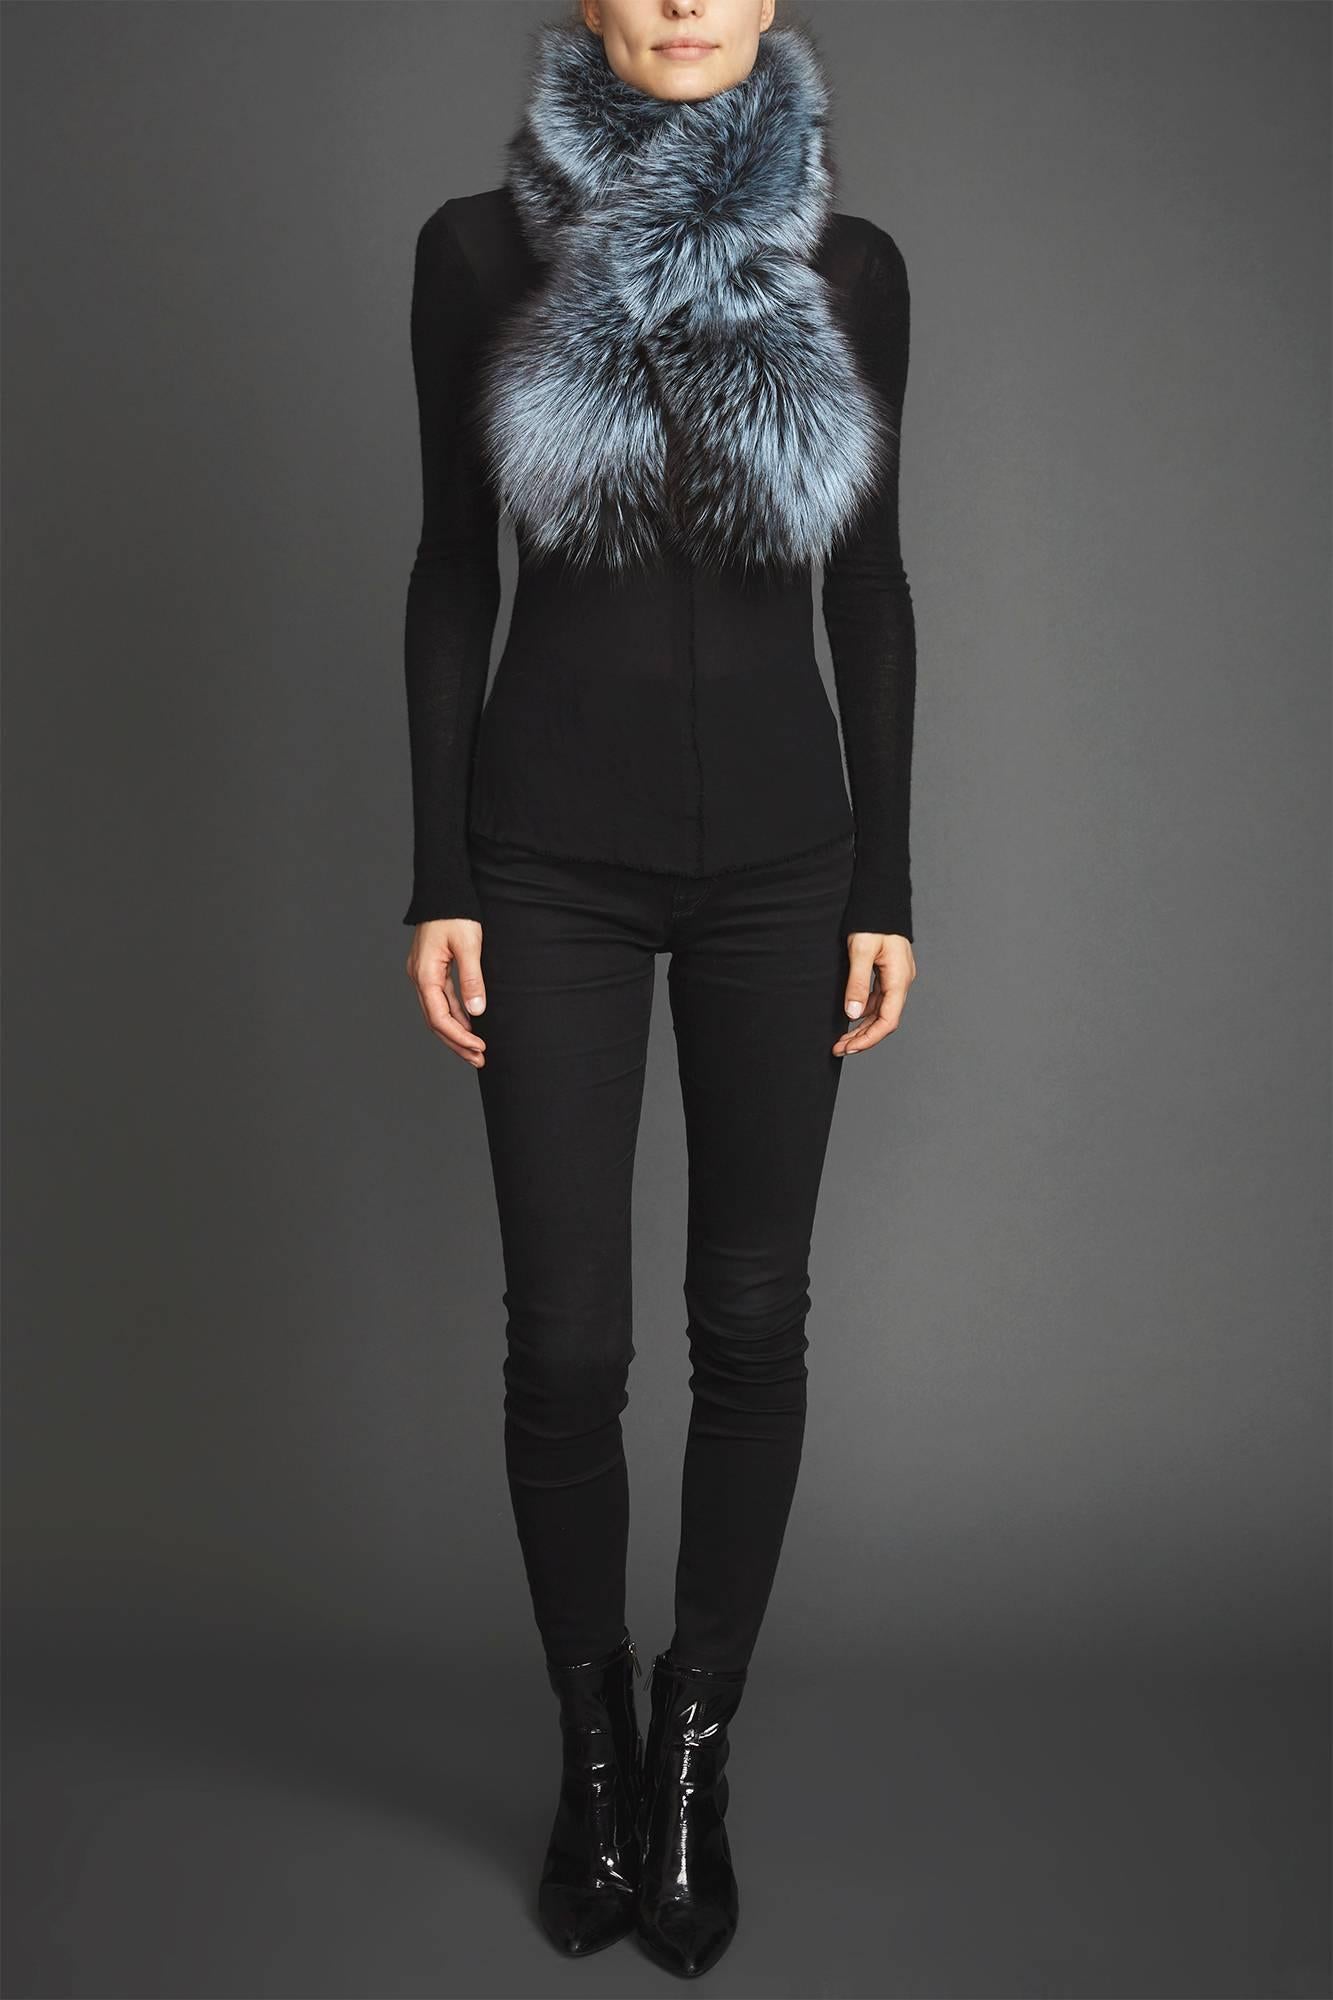 Verheyen London Lapel Cross-through Collar in Iced Topaz Fox Fur - Brand New

The Lapel Cross-through Collar is Verheyen London’s casual everyday design, which is perfectly shaped to wear over any outfit. Designed for layering, this structured